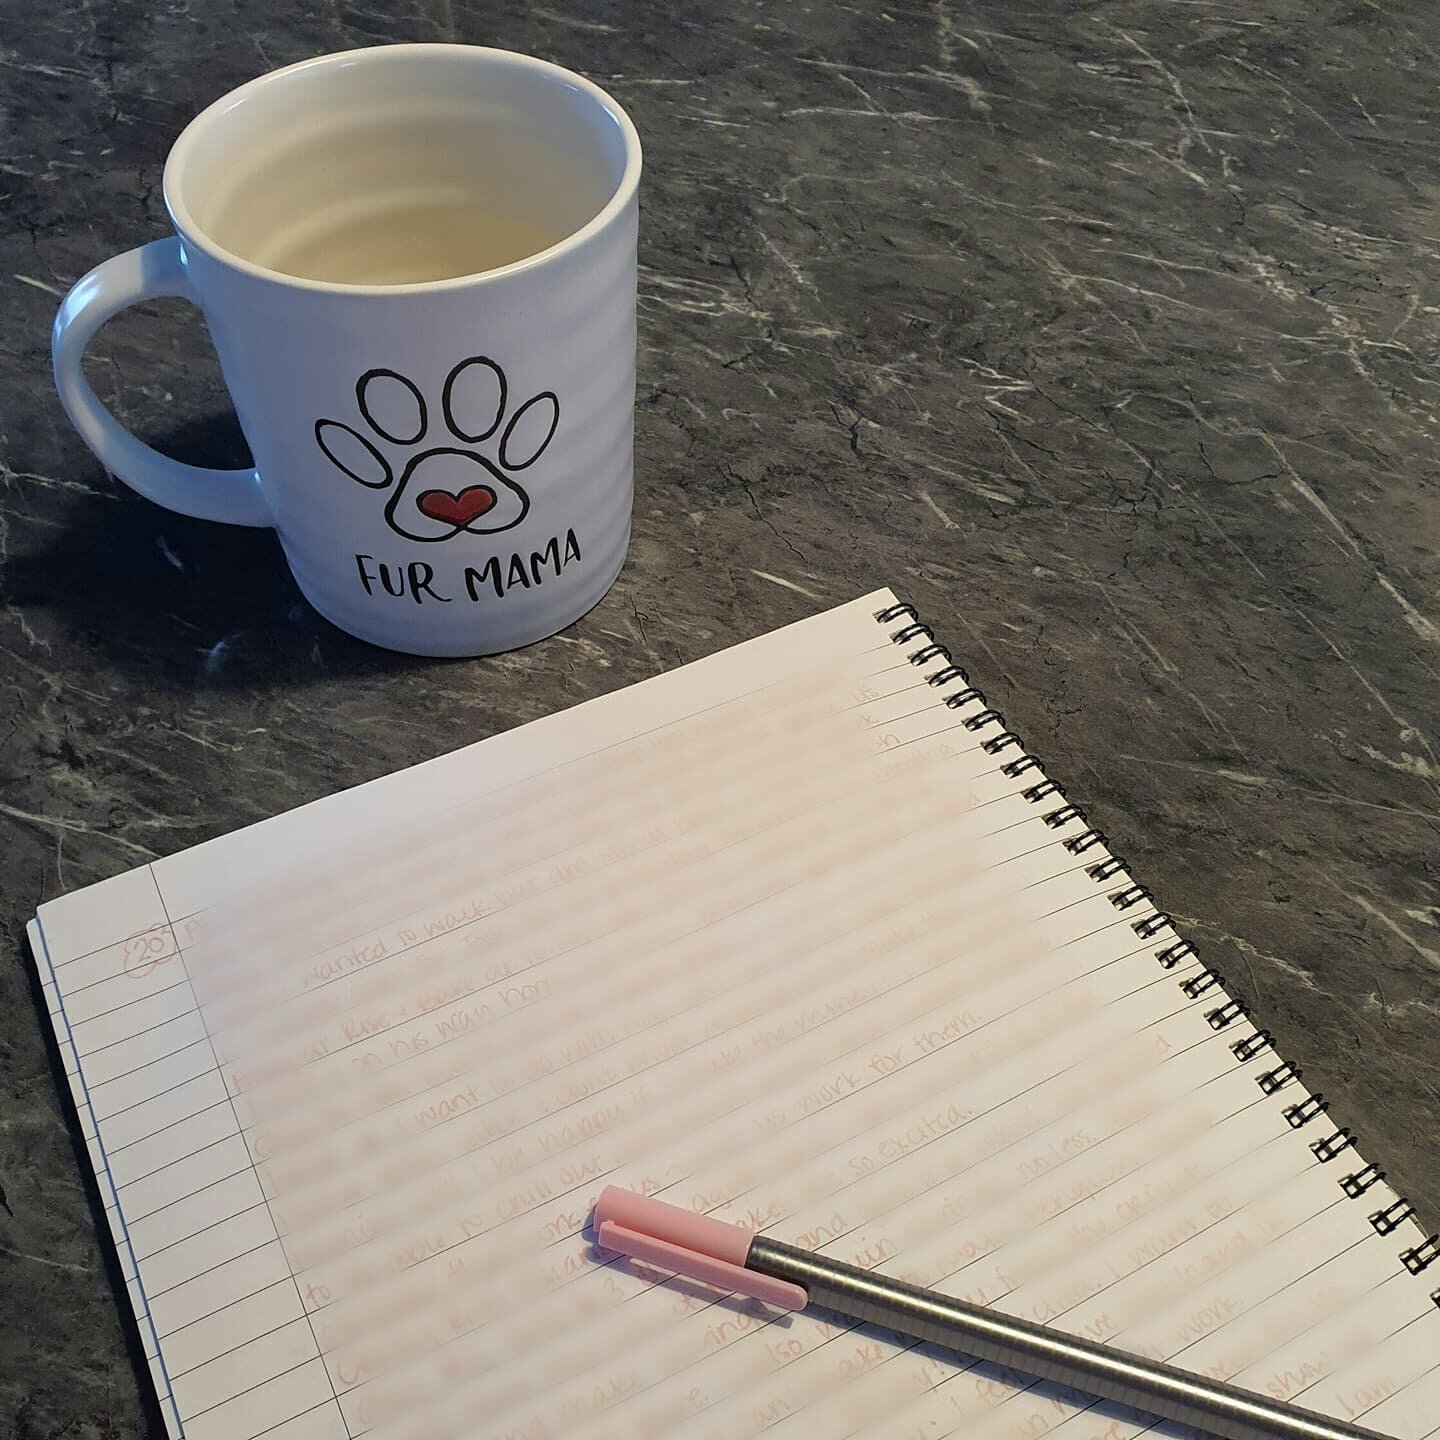 Monday morning journaling. 

I love to start my days off with a good brain dump. Even more, I love to start my weeks off by setting my intentions which motivates me forward for another week. 

How do you begin your week?

Making the time to write is 